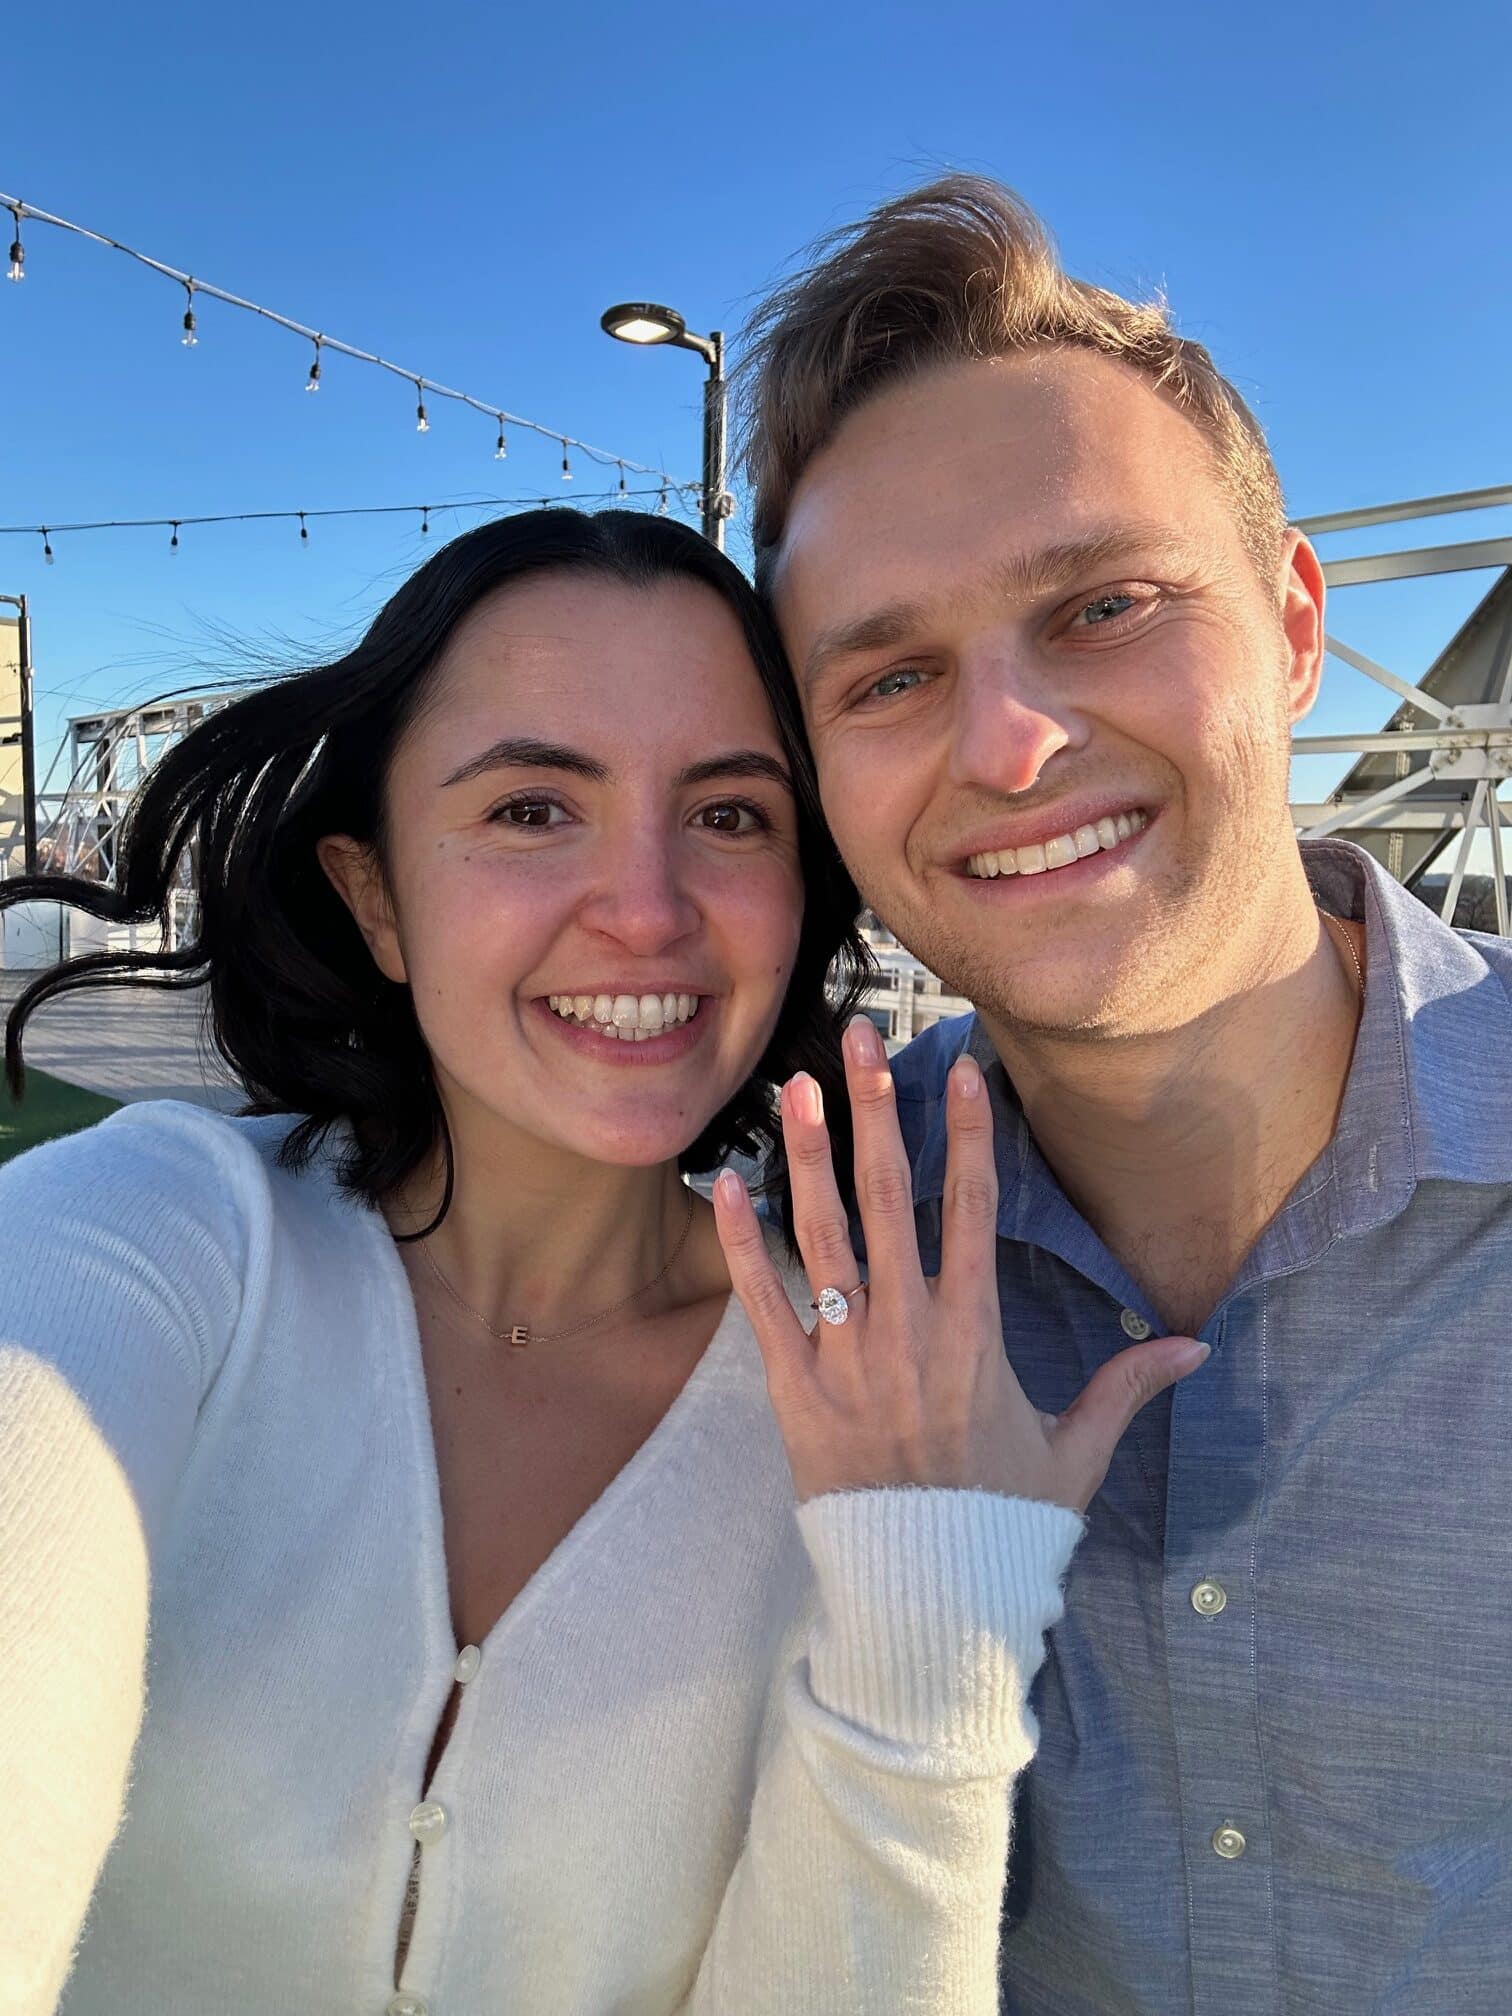 Jeremy and Eden get engaged!